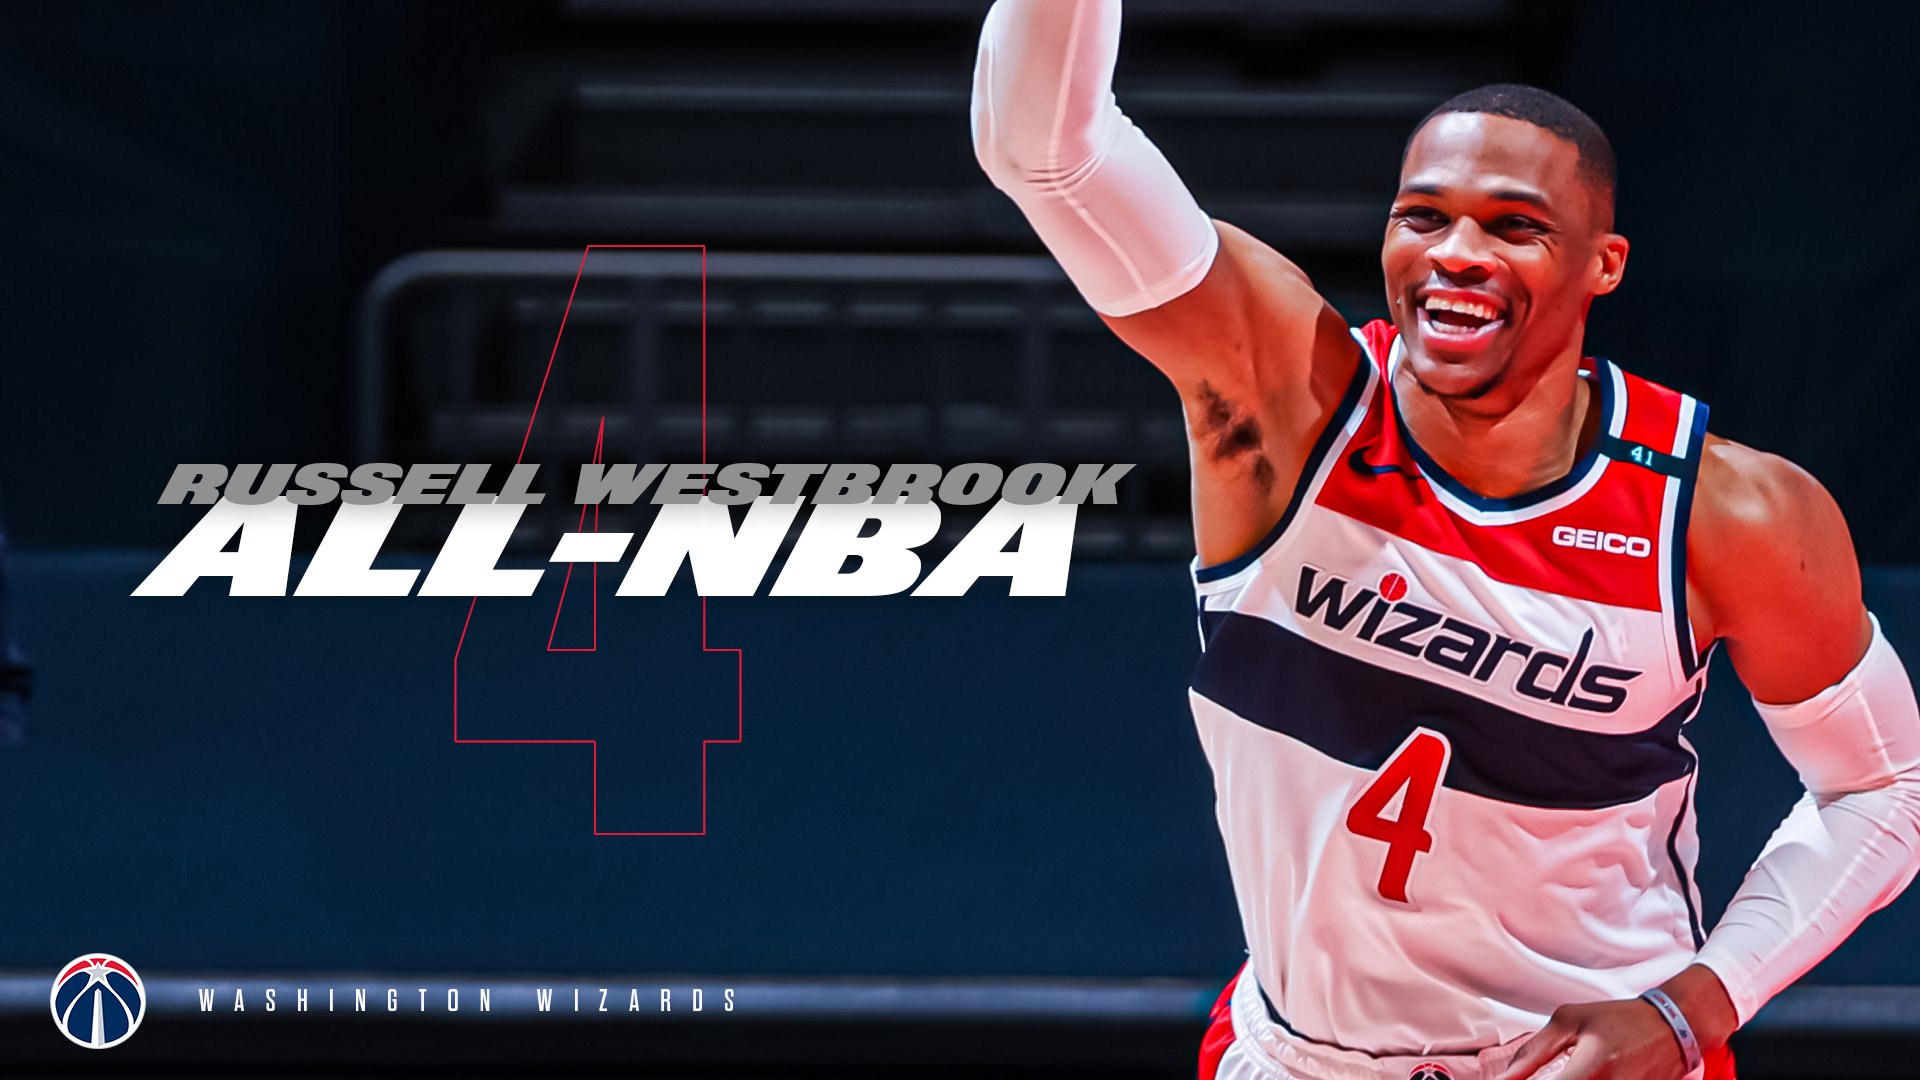 Washington Wizards on Twitter: Averaging a triple-double for the FOURTH  time in his career: 22.2 PPG, 11.5 RPG, and 11.8 APG! 😤 @russwest44 is  All-NBA worthy.  / Twitter